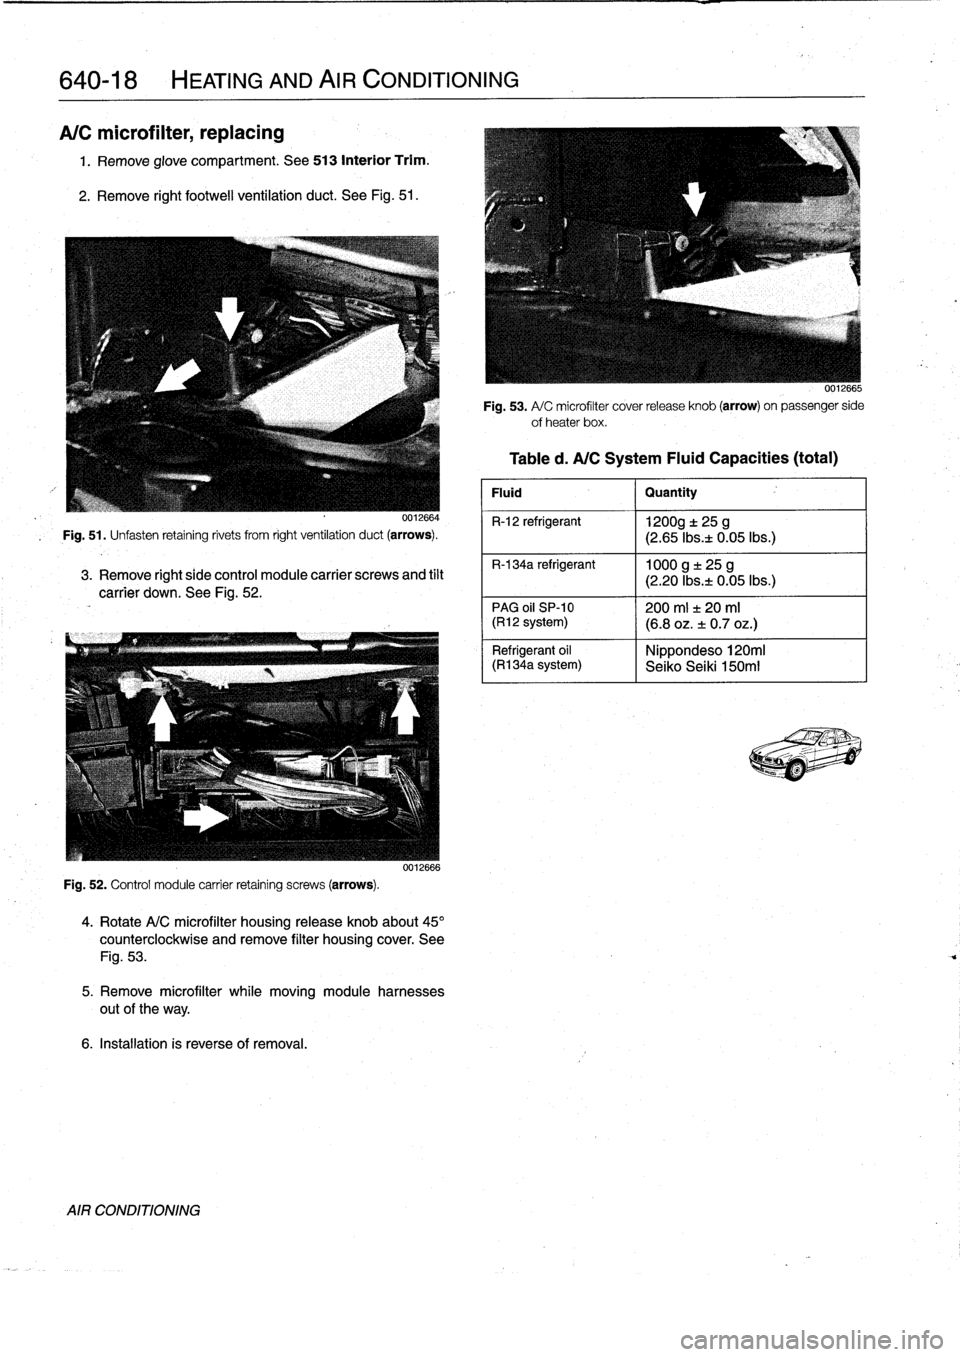 BMW M3 1994 E36 Workshop Manual 
640-18

	

HEATING
AND
AIR
CONDITIONING

A/C
microfilter,
replacing

1
.
Remove
glove
compartment
.
See
513
Interior
Trim
.

2
.
Remove
right
footwell
ventilation
duct
.
See
Fig
.
51
.

0012664

Fig
